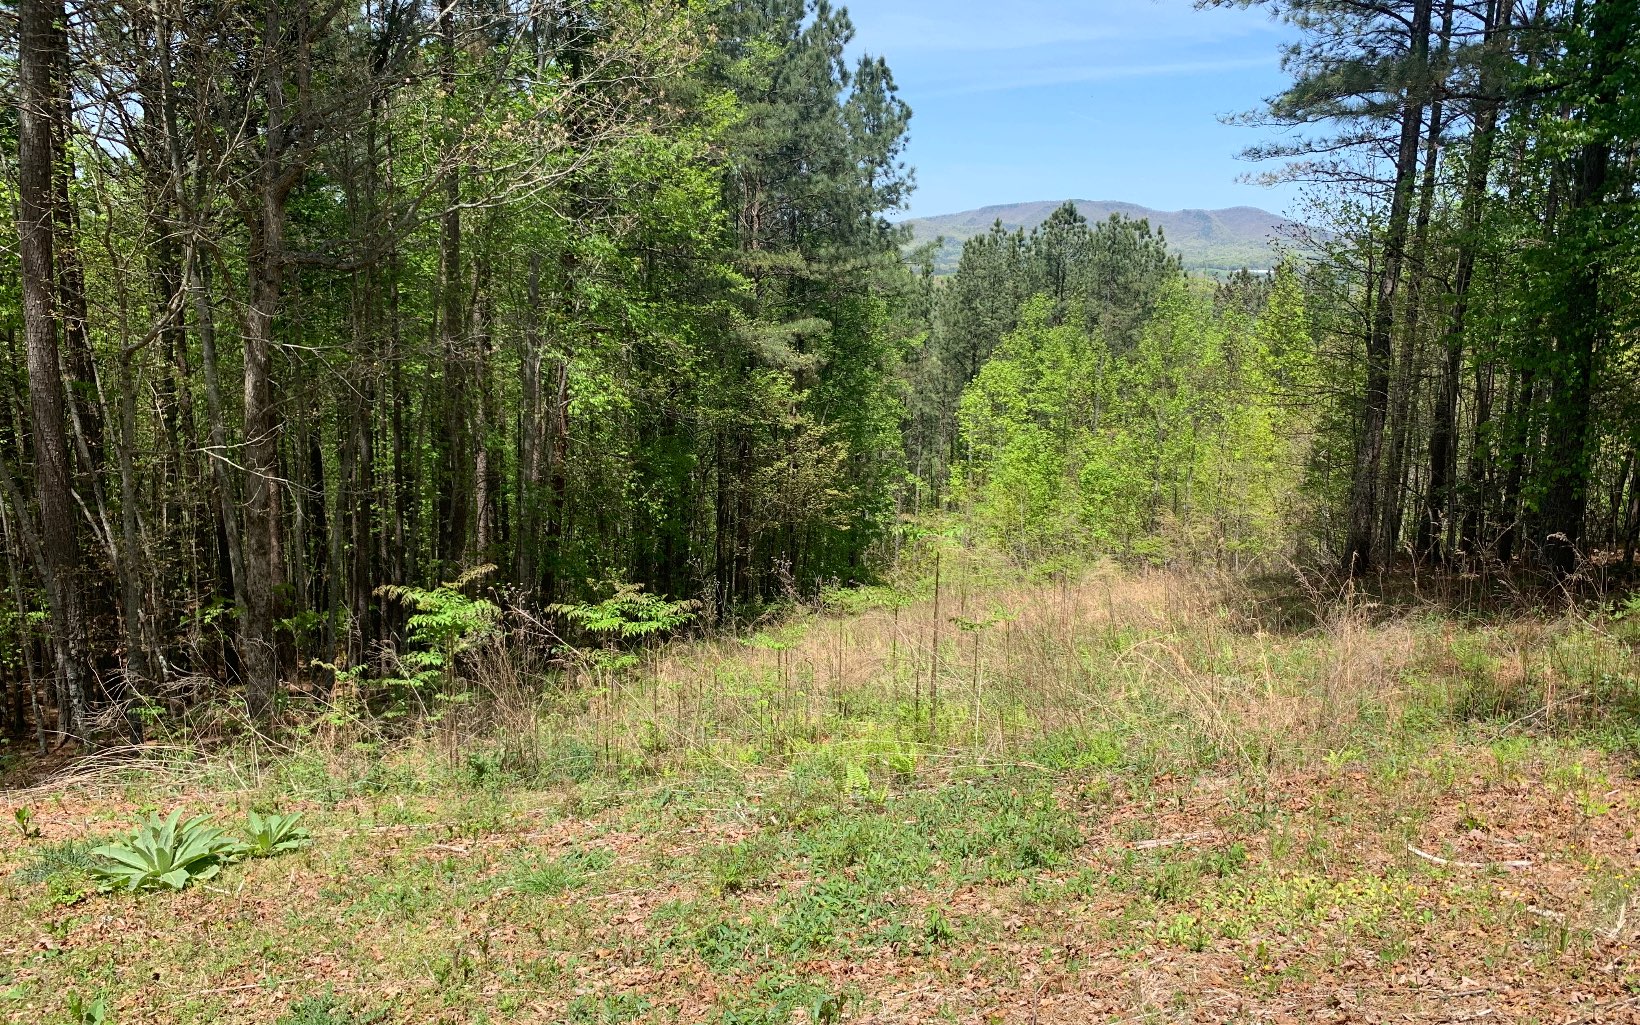 STUNNING LAYERED LONG RANGE MOUNTAIN VIEWS IN THE MOUNTAINS OF NORTH GEORGIA! Located across the street from a privately owned 190 acre tract of land, this beautifully wooded lot has been partially cleared to open up the mountain views and with more select trimming & removal the perfect place to build your mountain retreat. Only minutes from town this paved subdivision is the right place for your North Georgia mountain home.